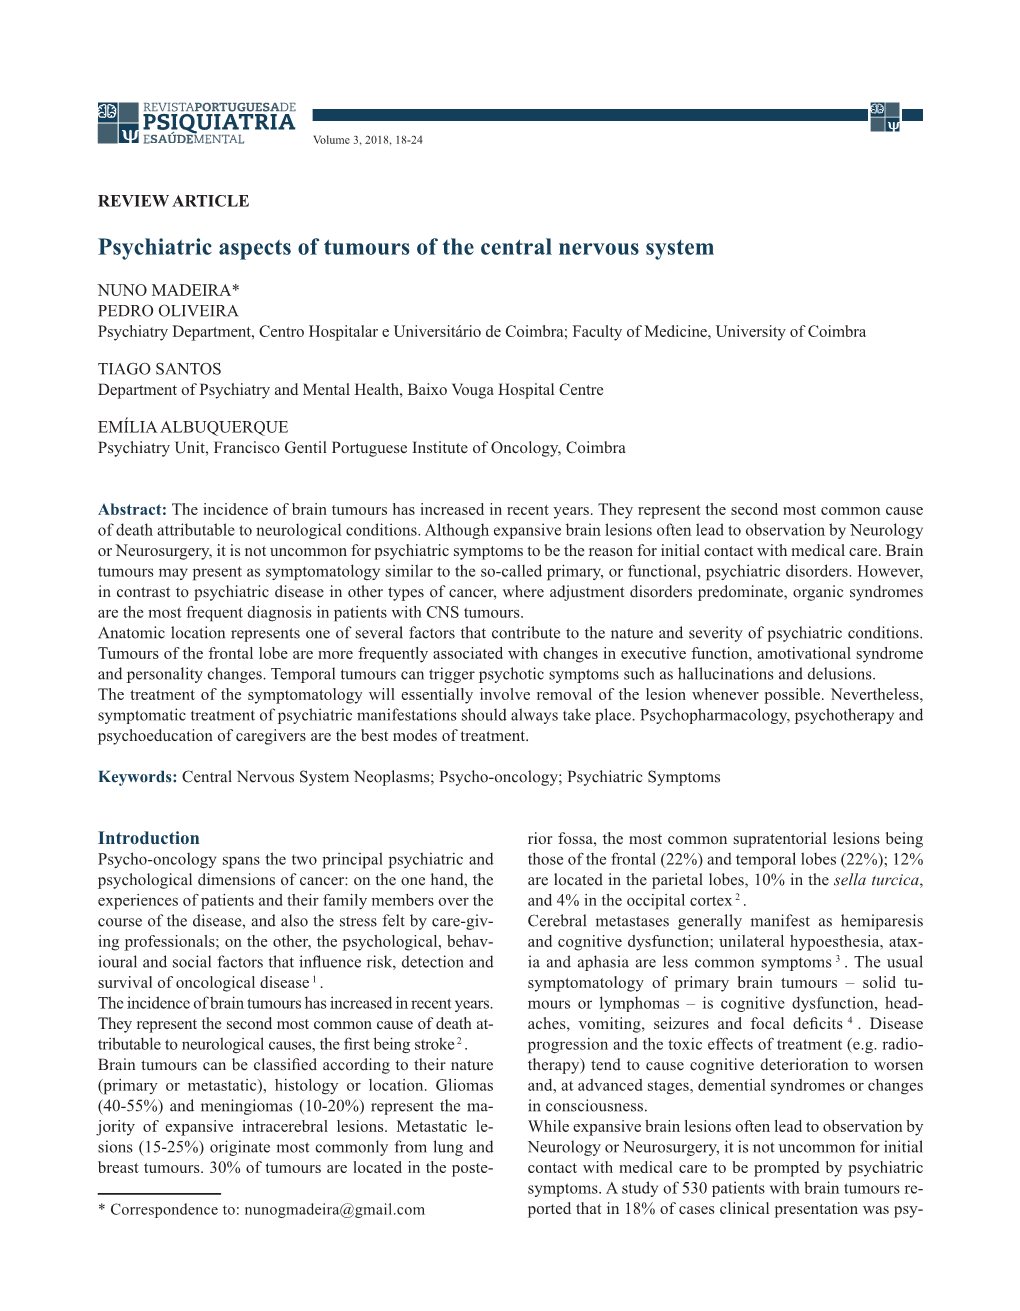 Psychiatric Aspects of Tumours of the Central Nervous System